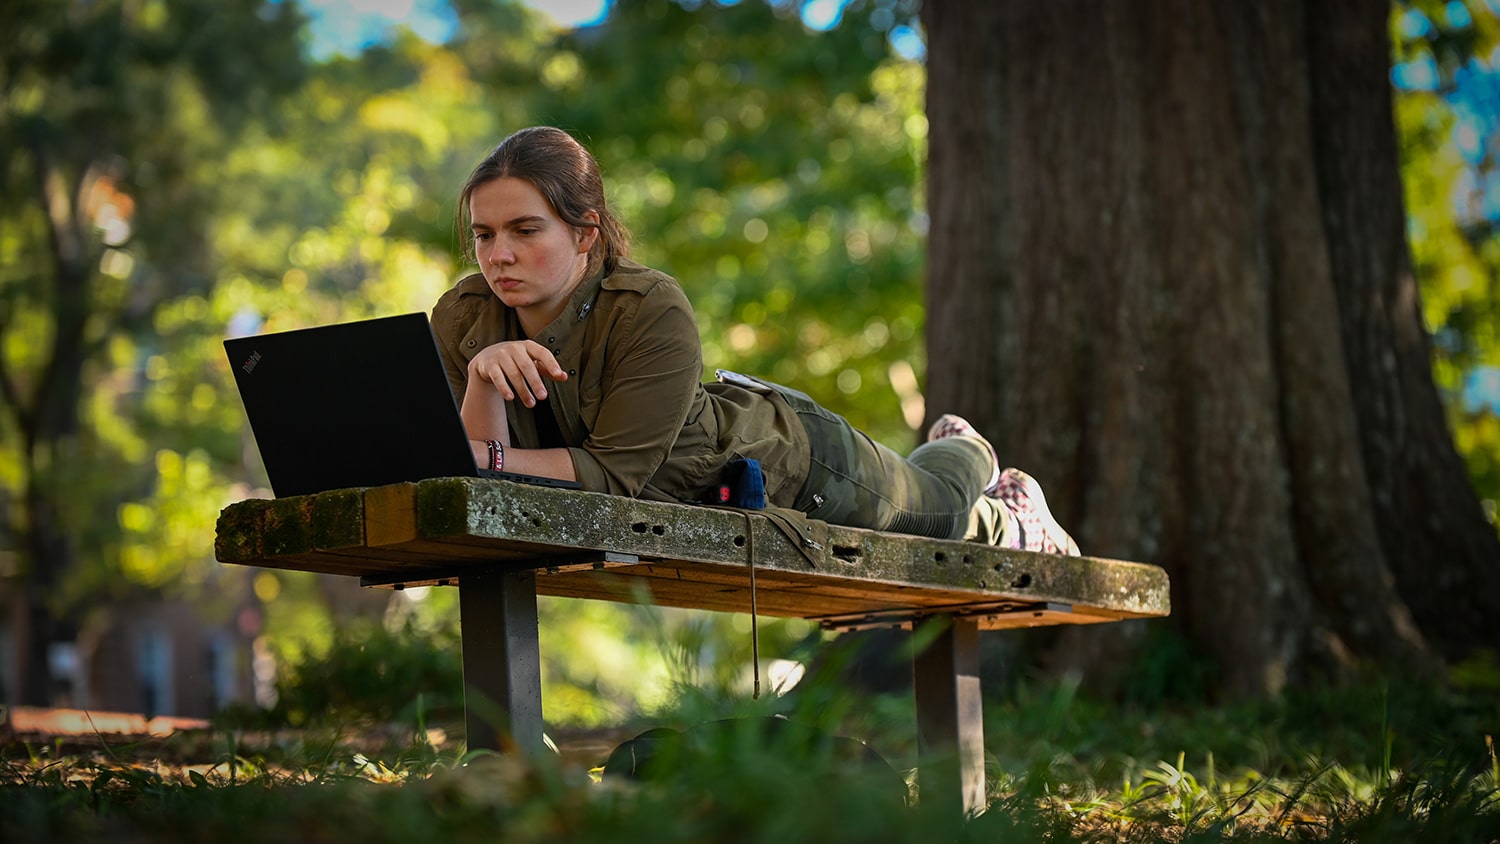 A student studies outdoors on a bench on a fall day.